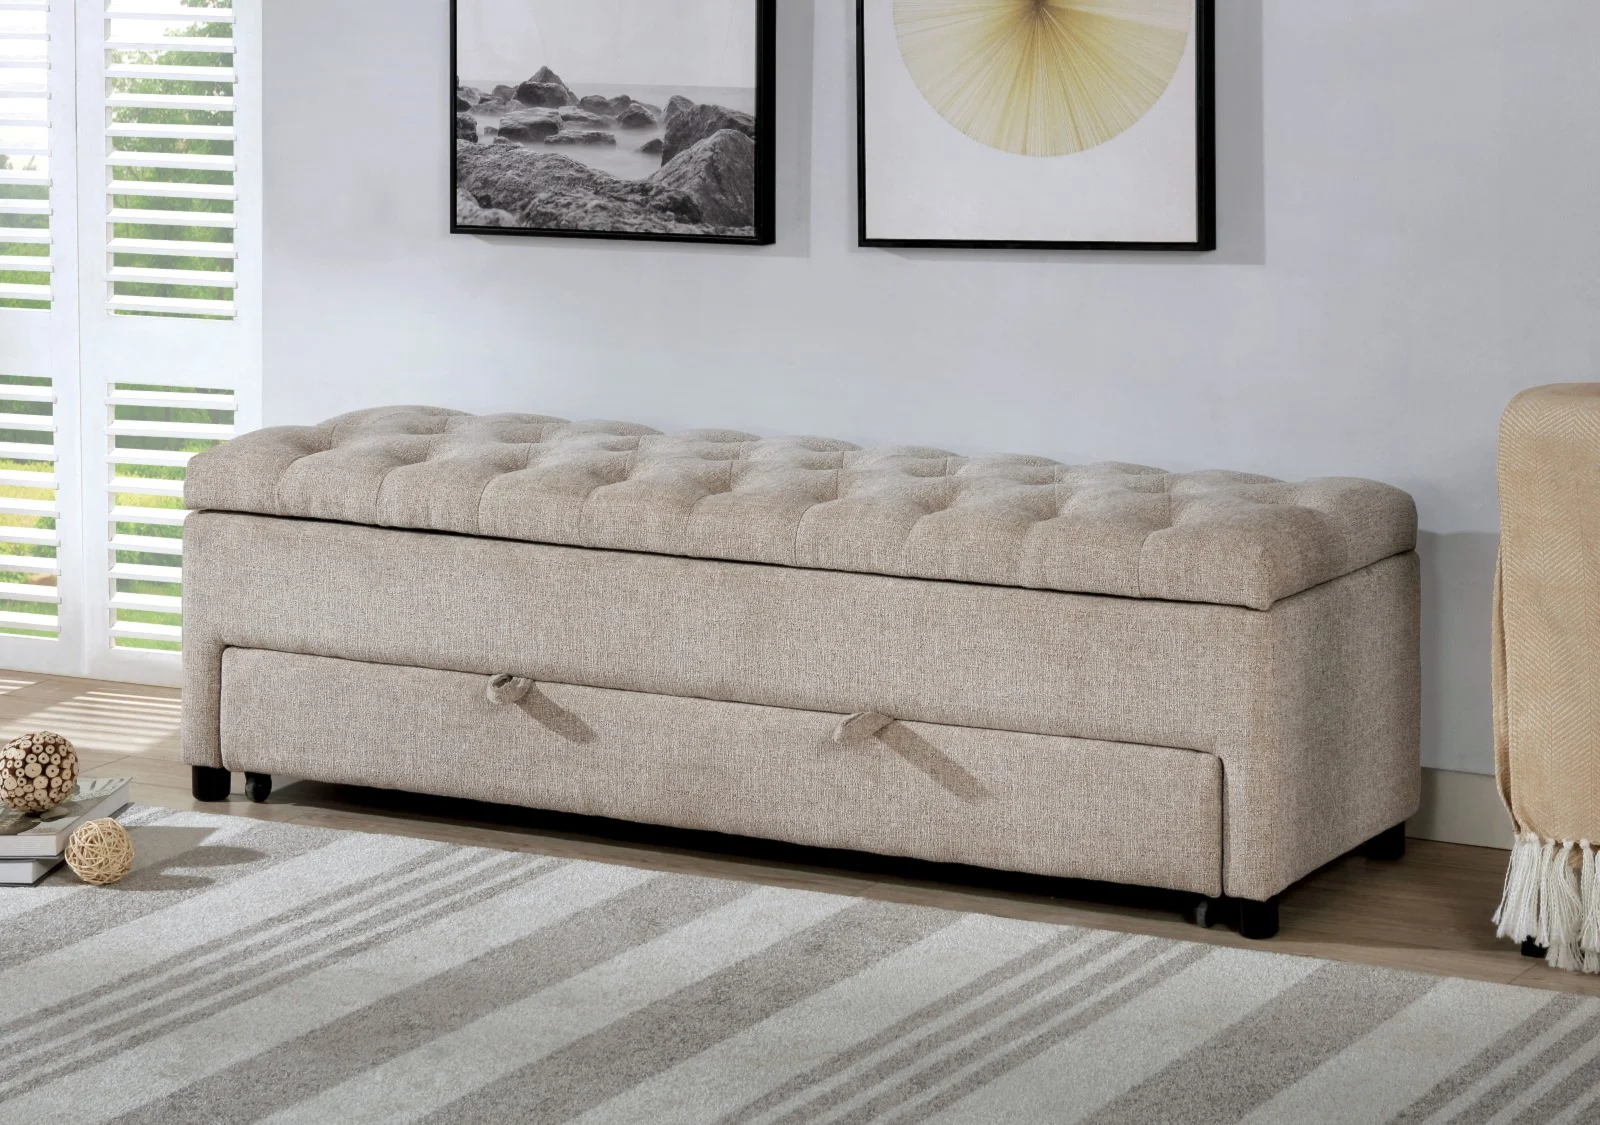 Aguda Transitional Upholstered Storage Bench with Lift Seat | Household  Furniture | Bench - Accent Bench